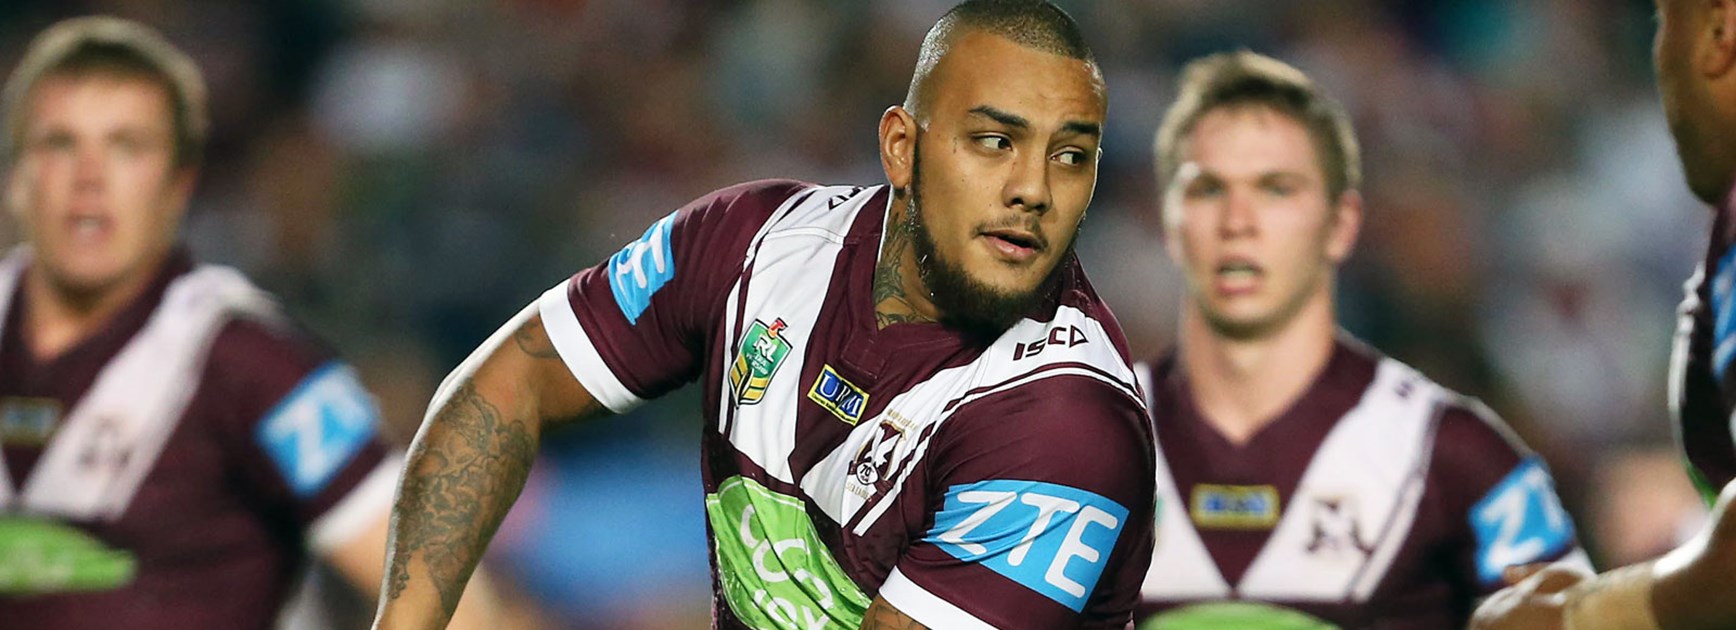 Manly prop Addin Fonua-Blake scored two tries against the Cowboys in Round 16.